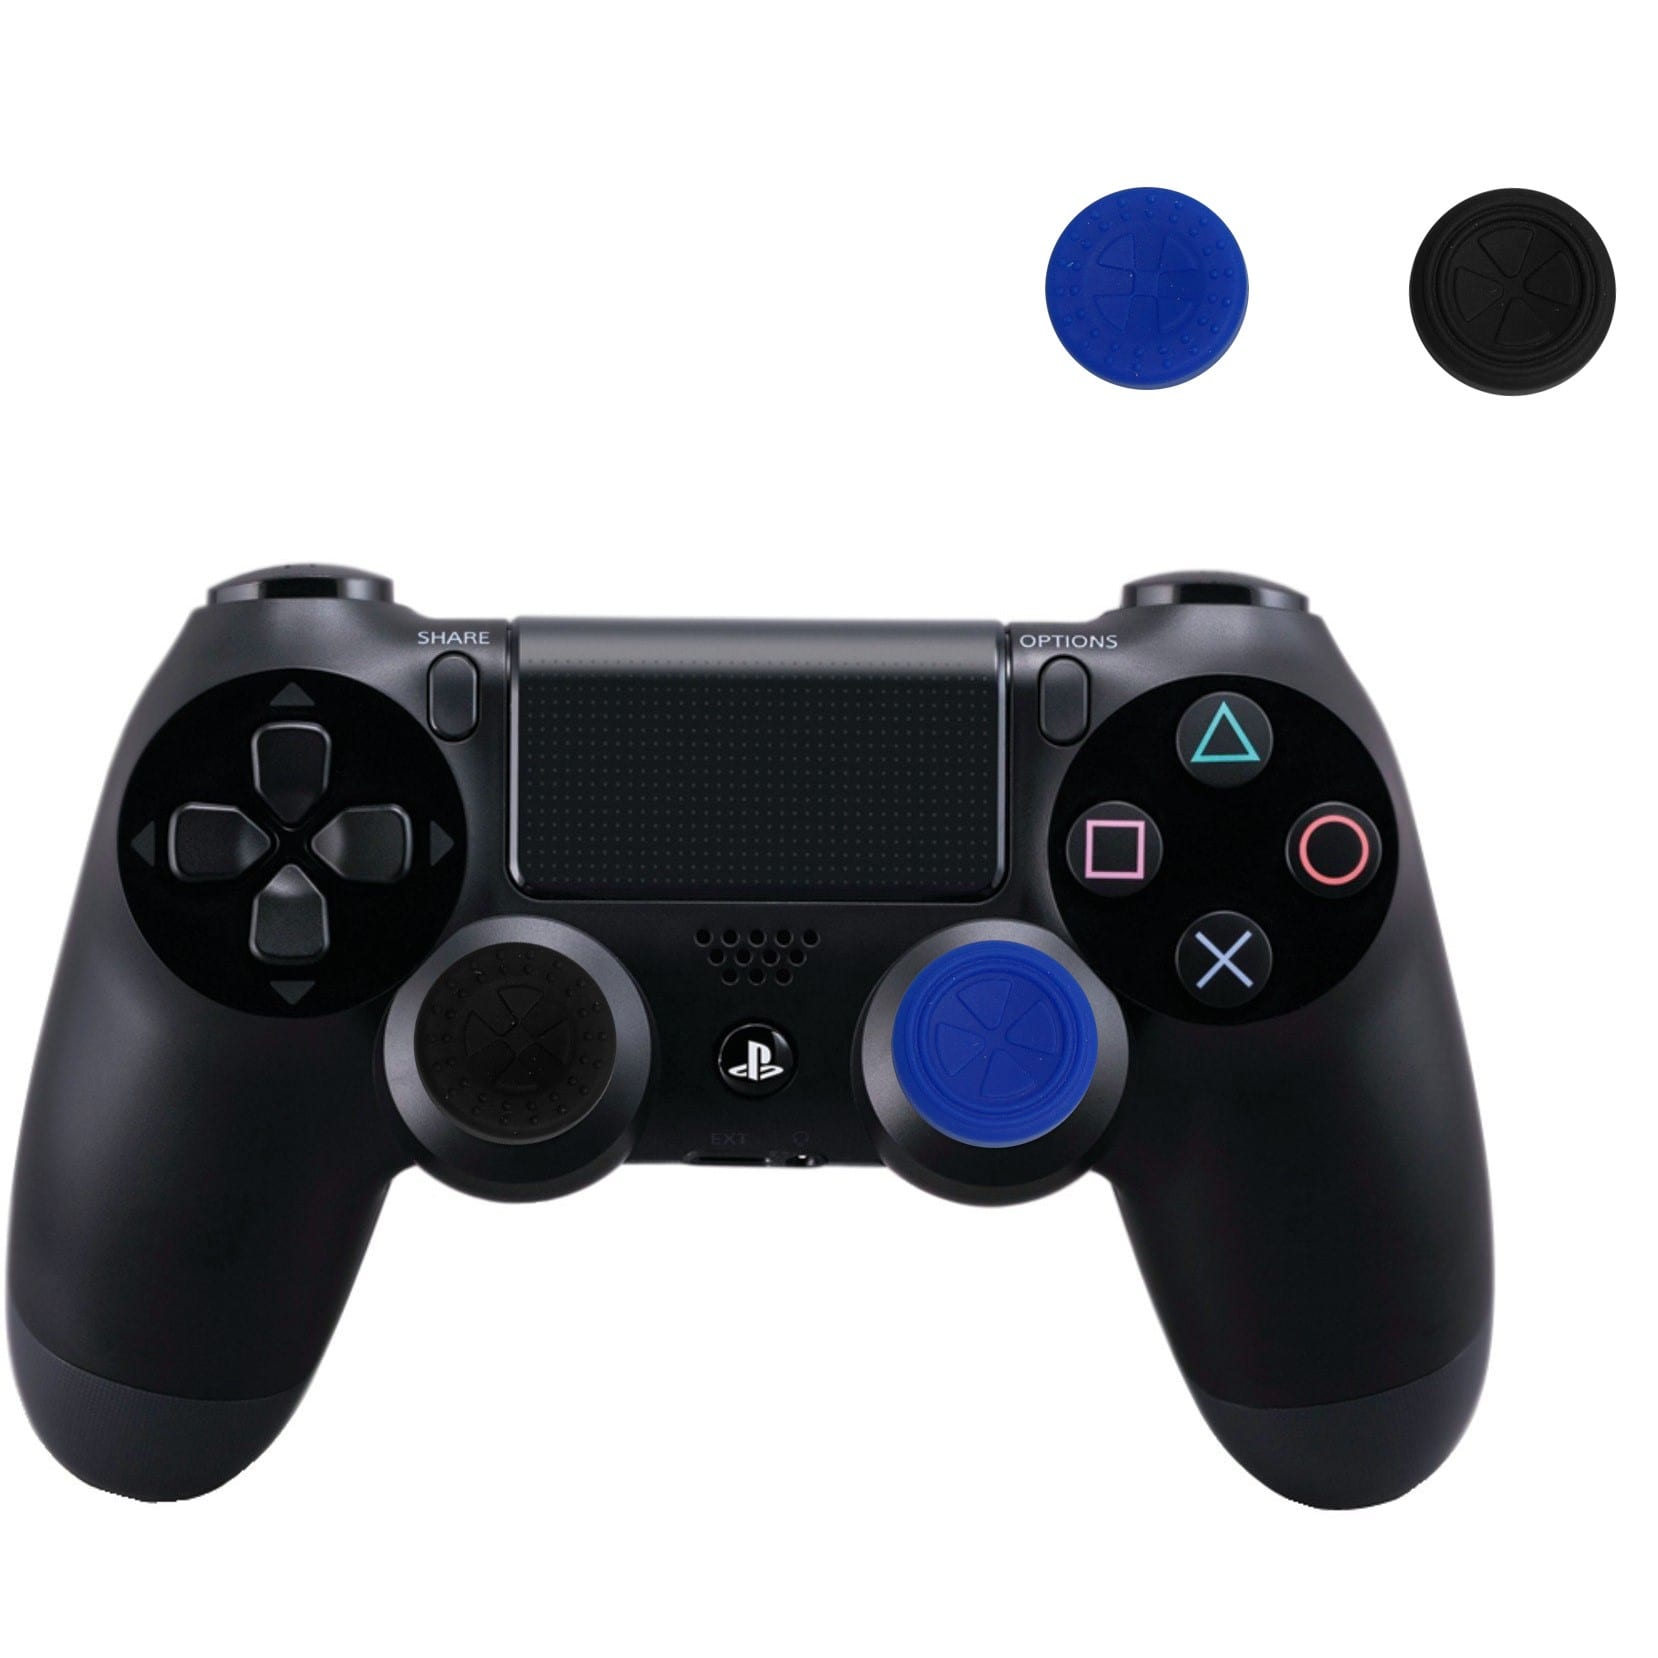 SparkFox Controller Deluxe Thumb Grip 4 Pack- PS4